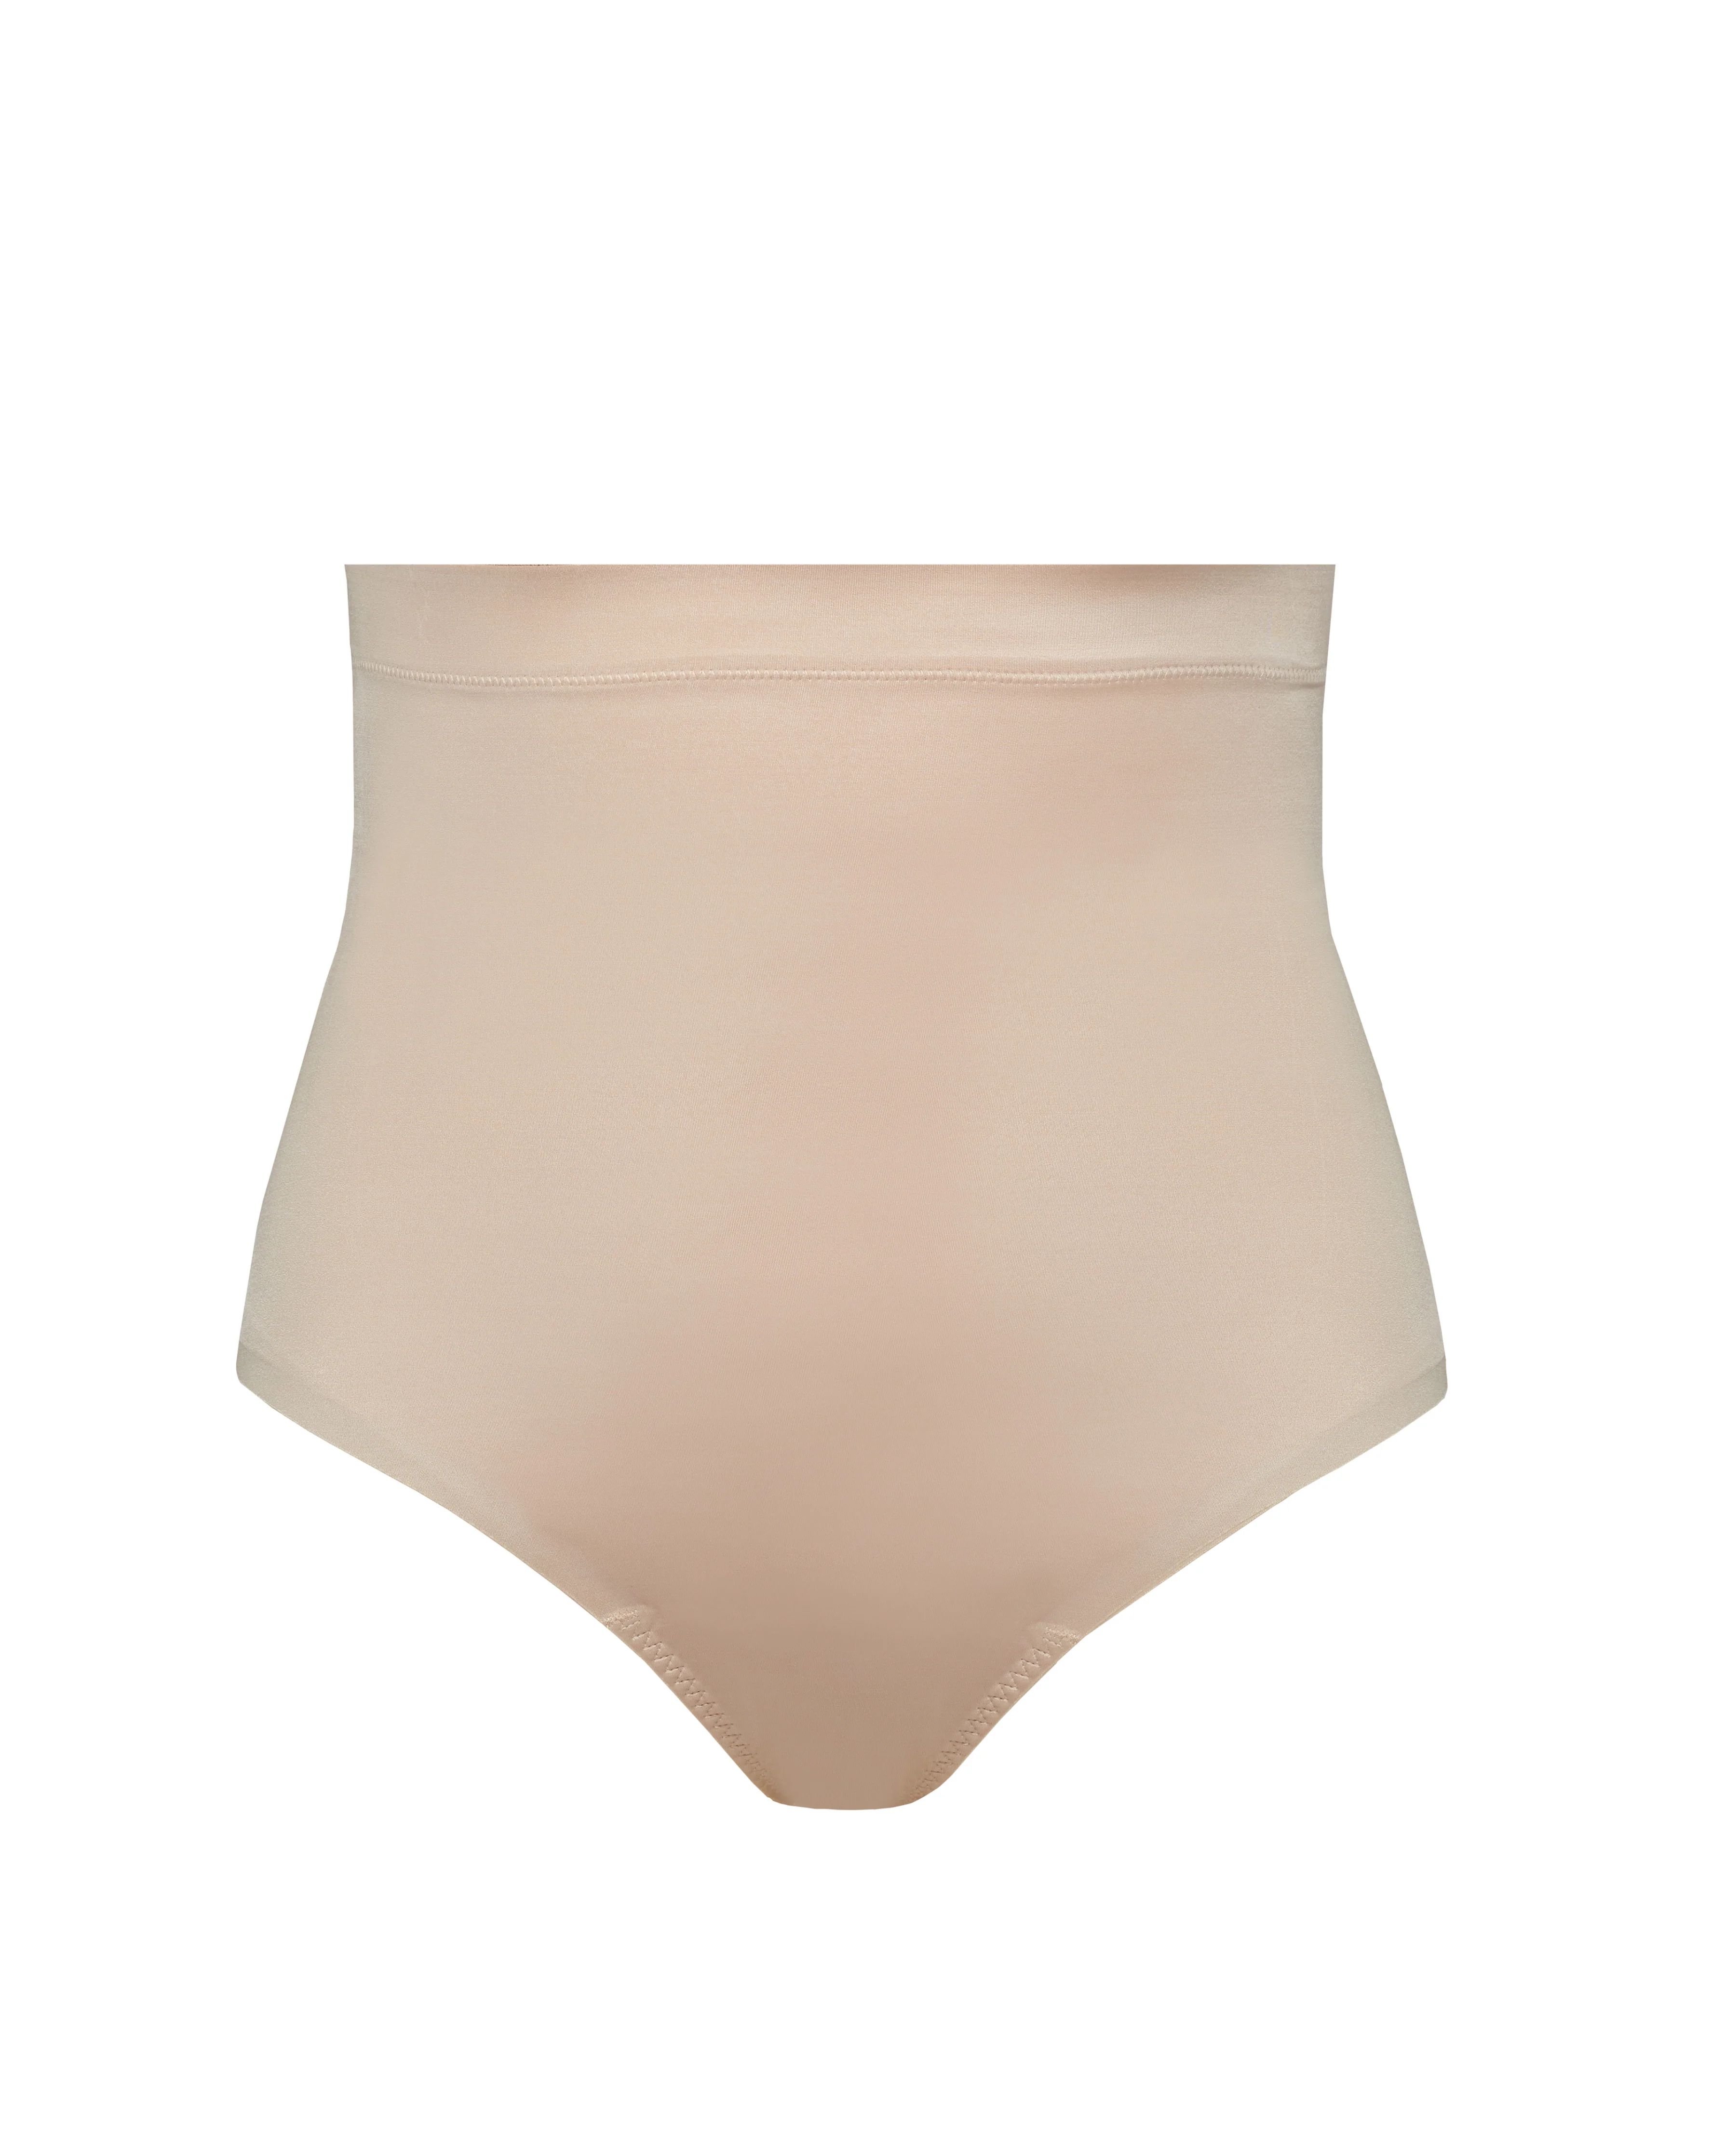 Suit Your Fancy High-Waisted Thong | Spanx